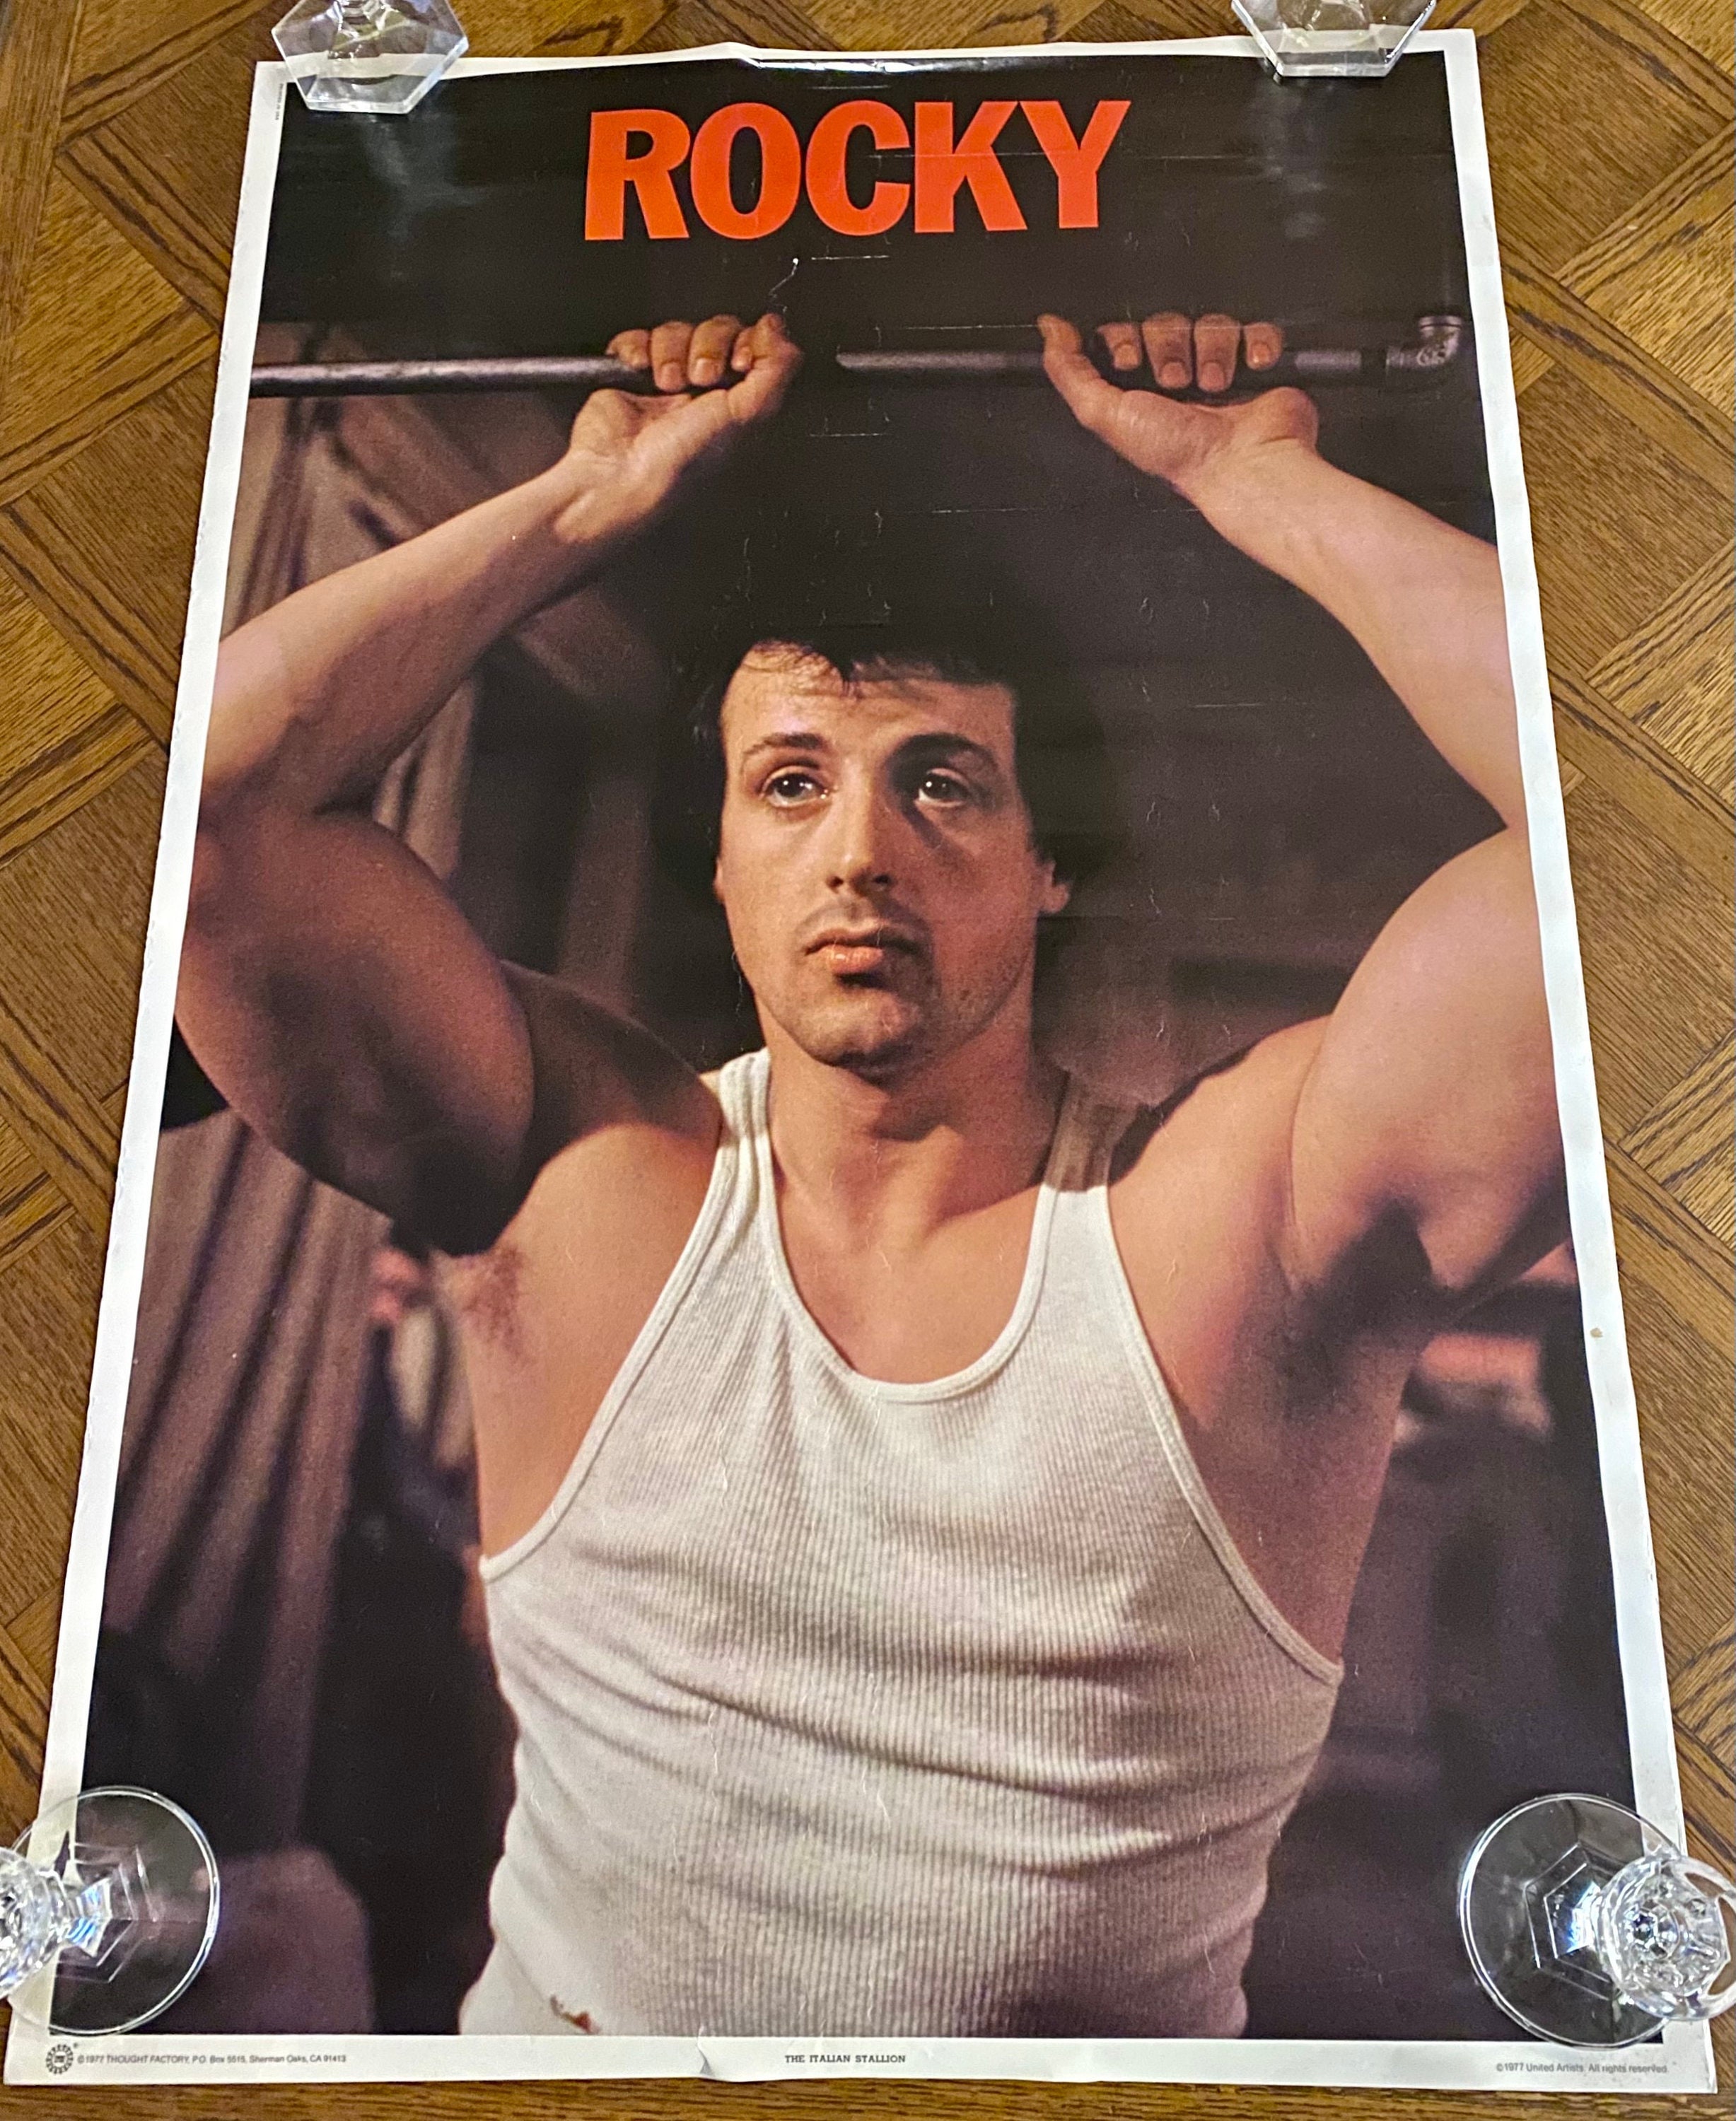 Original 1977 ROCKY Movie Poster Commercial Print SYLVESTER STALLONE